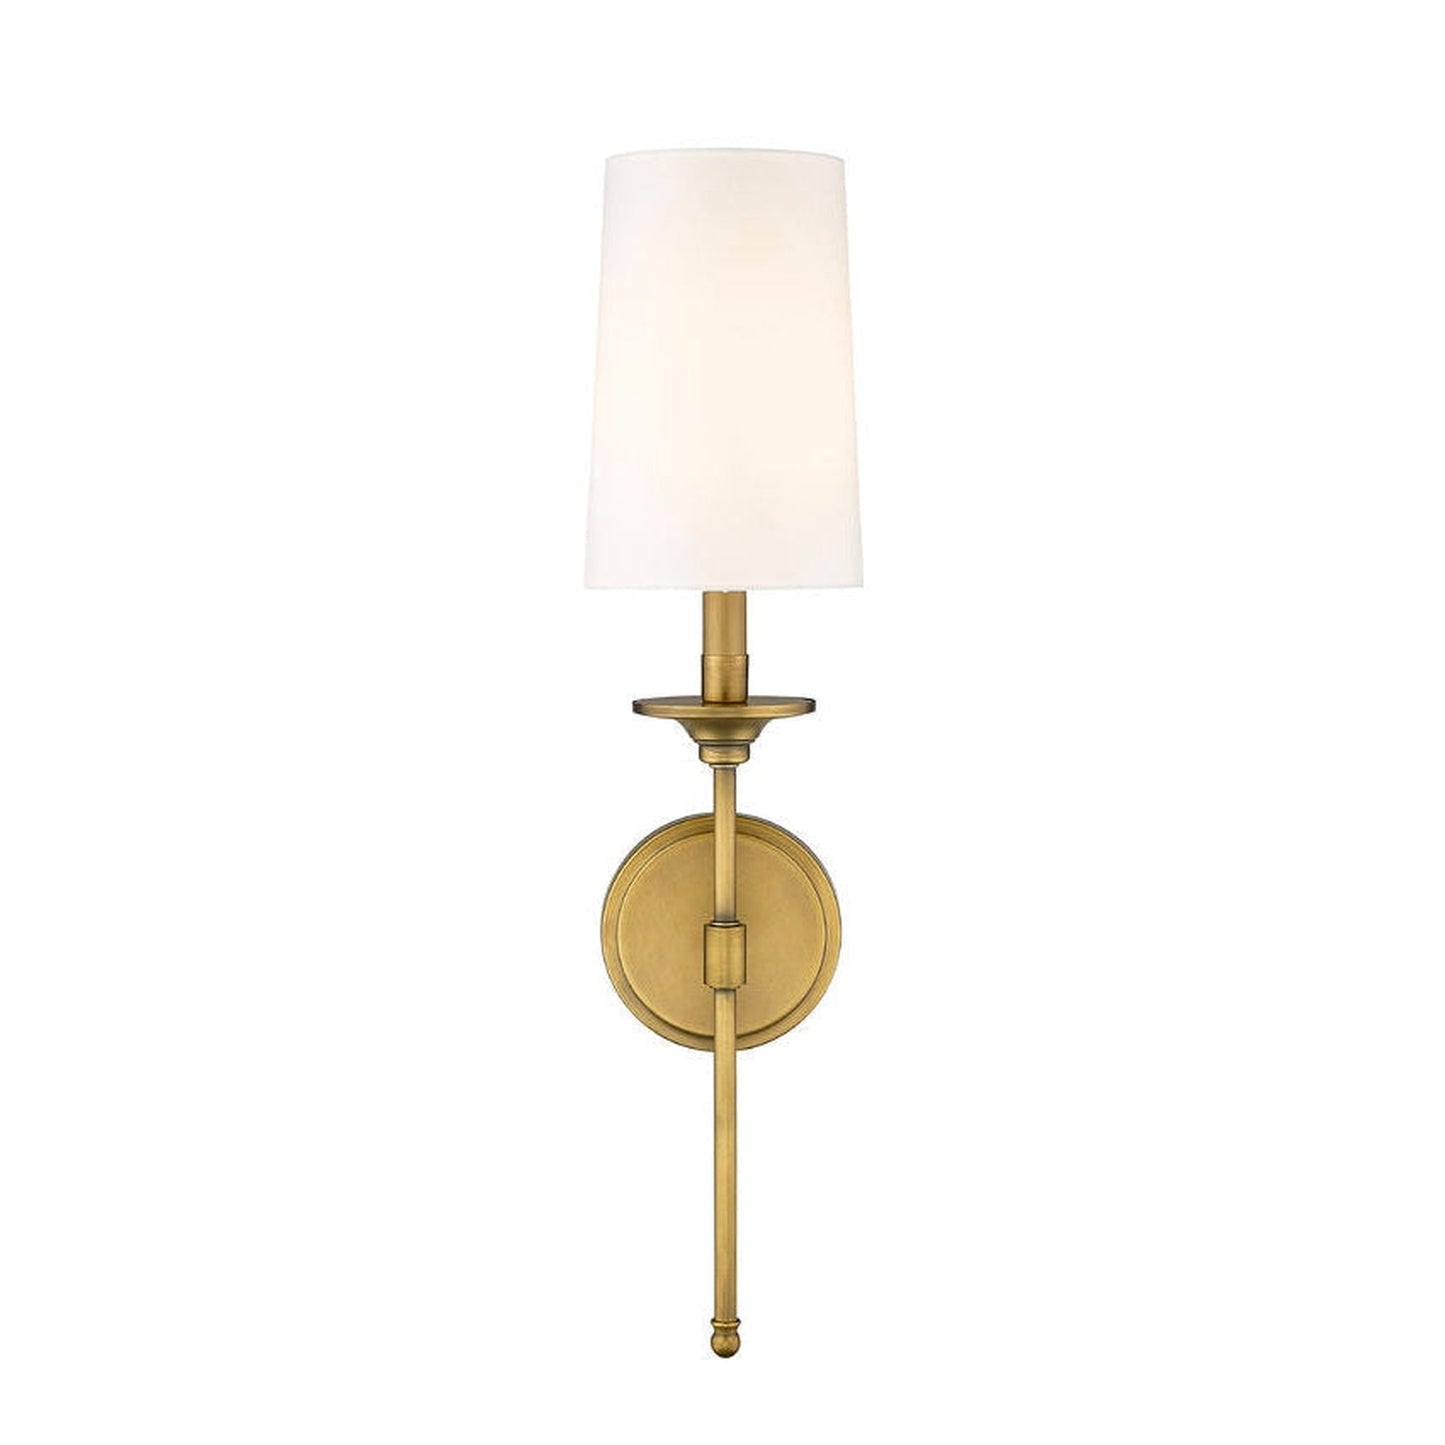 Z-Lite Emily 6" 1-Light Rubbed Brass Wall Sconce With Off-White Cloth Shade